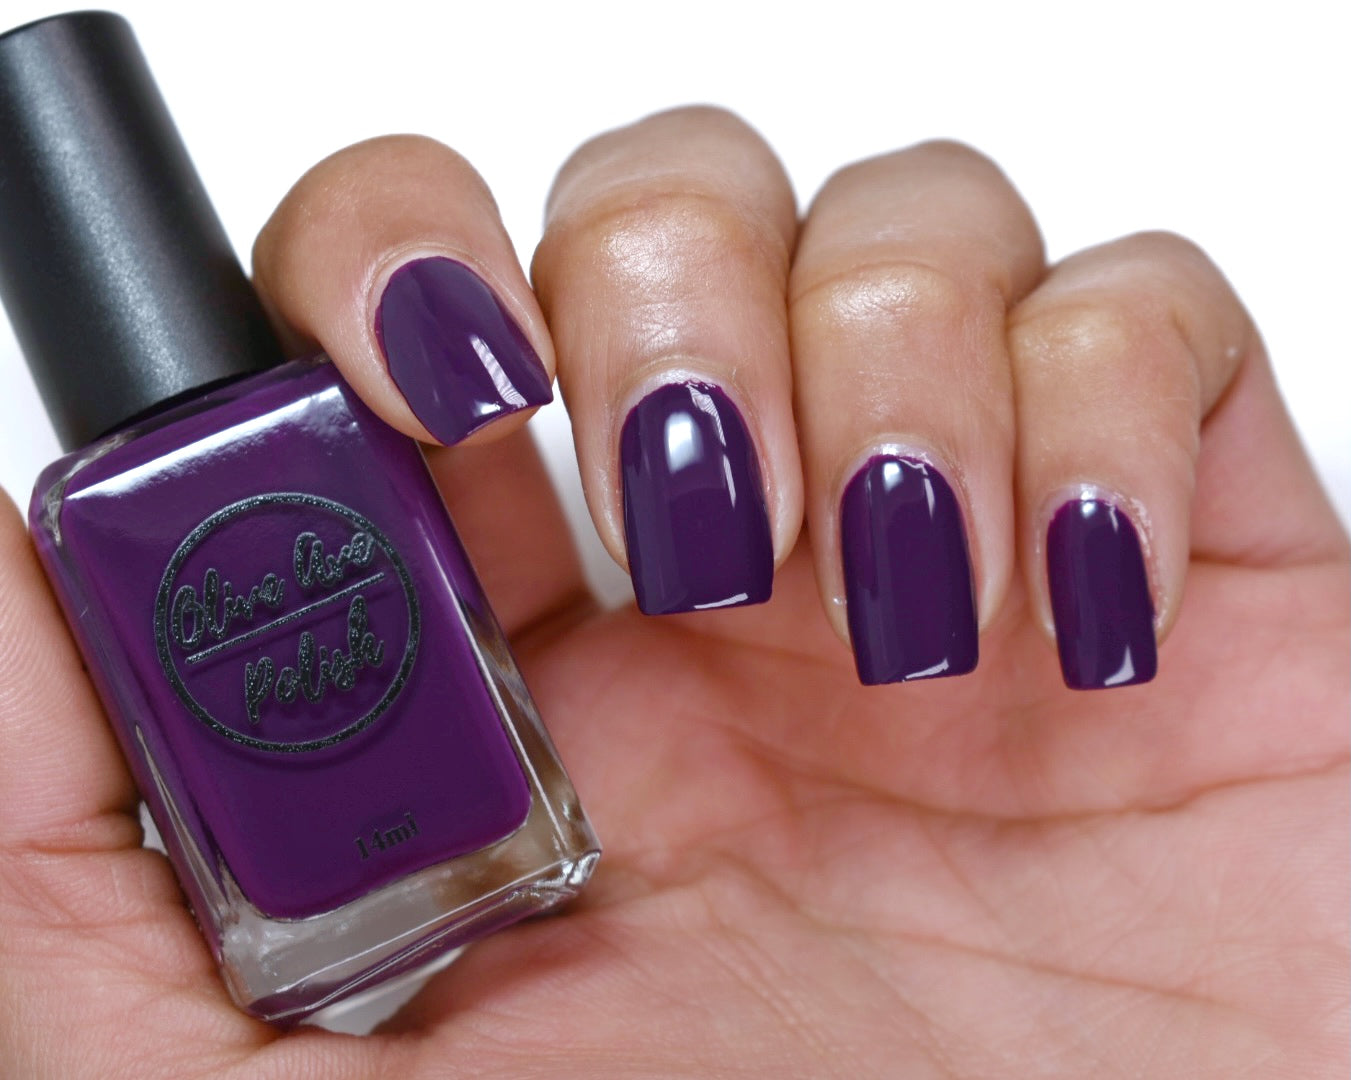 Moraze Magic Moment Non Toxic Nail Polish Violet 5 ml Online in India, Buy  at Best Price from Firstcry.com - 10413419